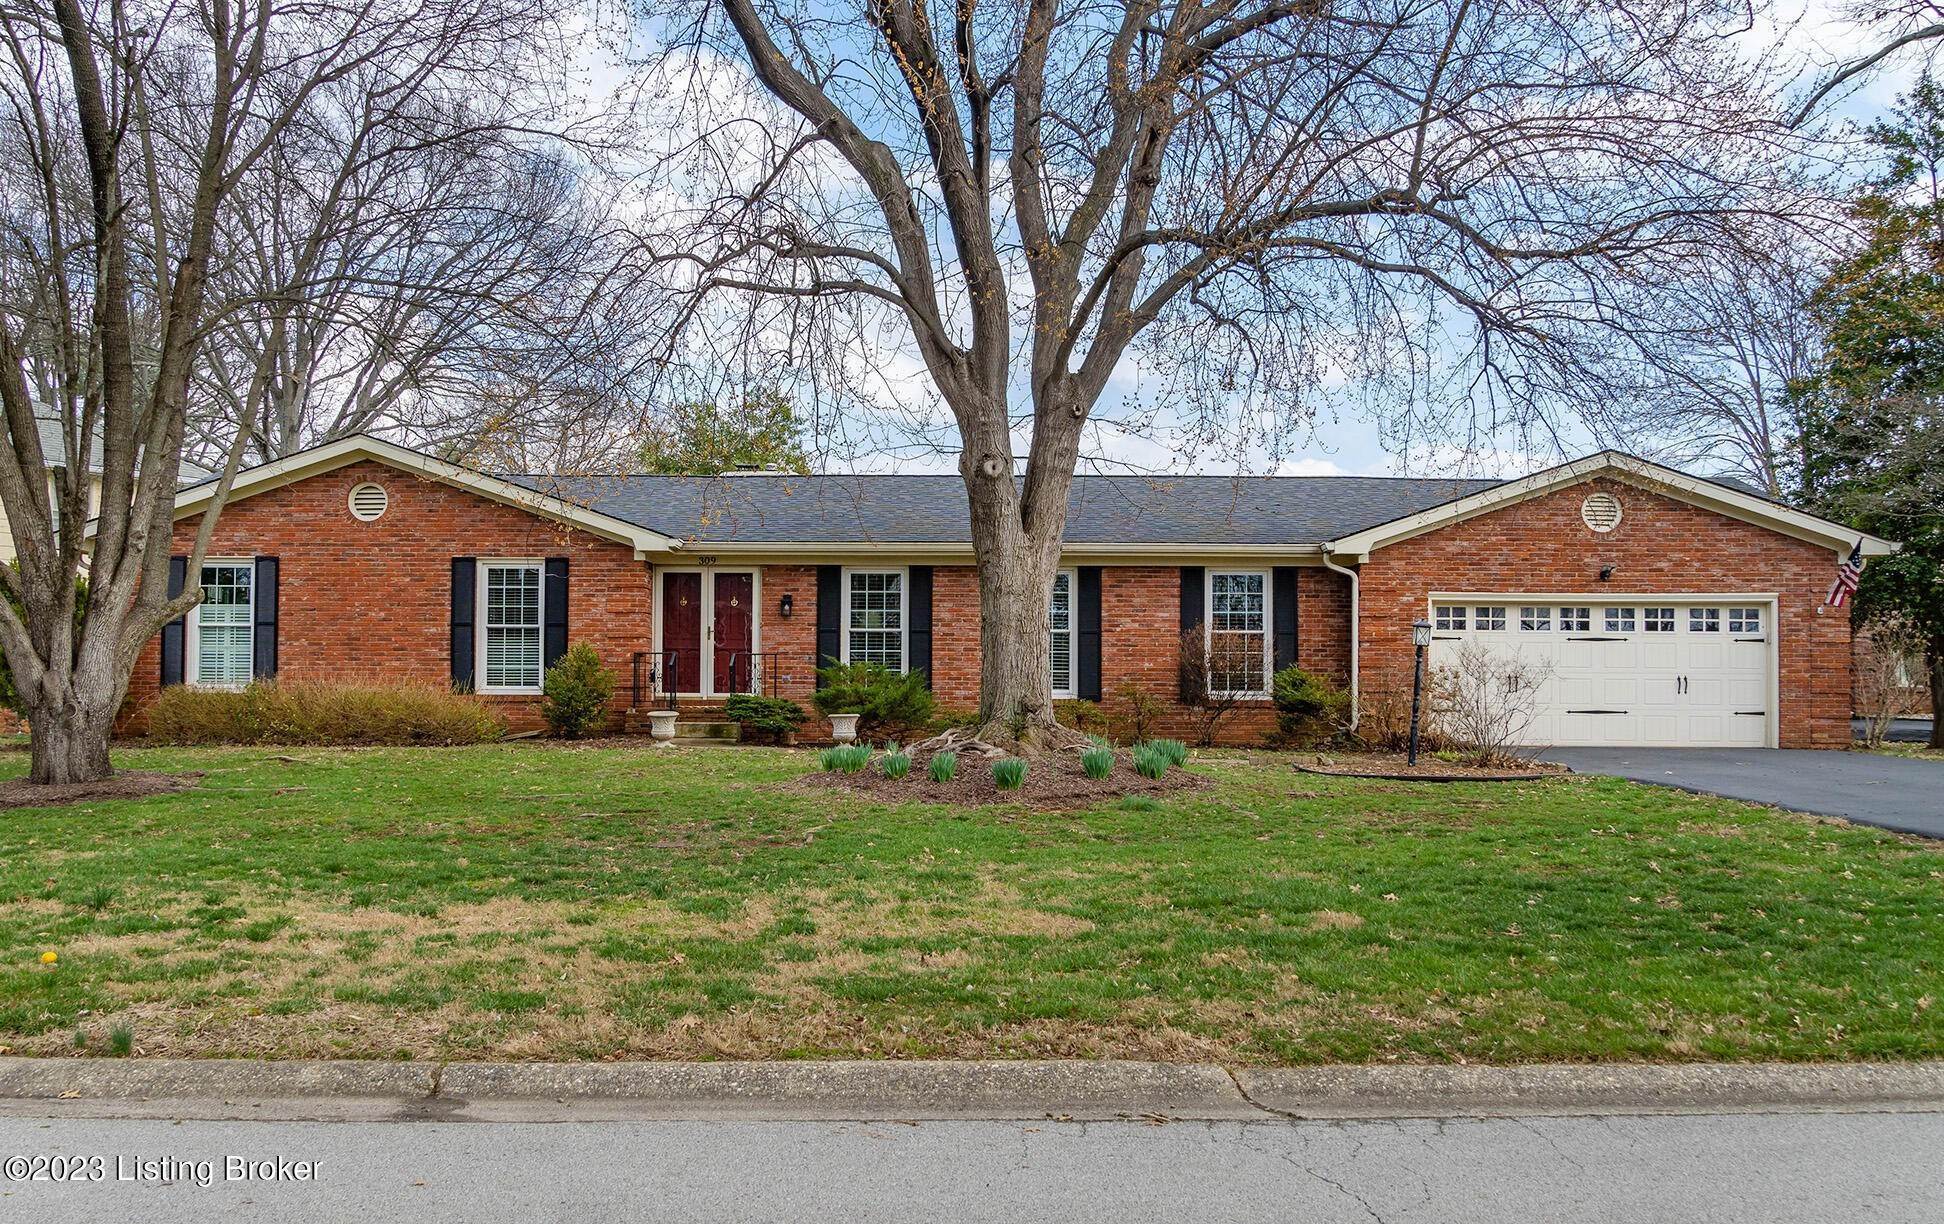 Single Family at Louisville, KY 40222